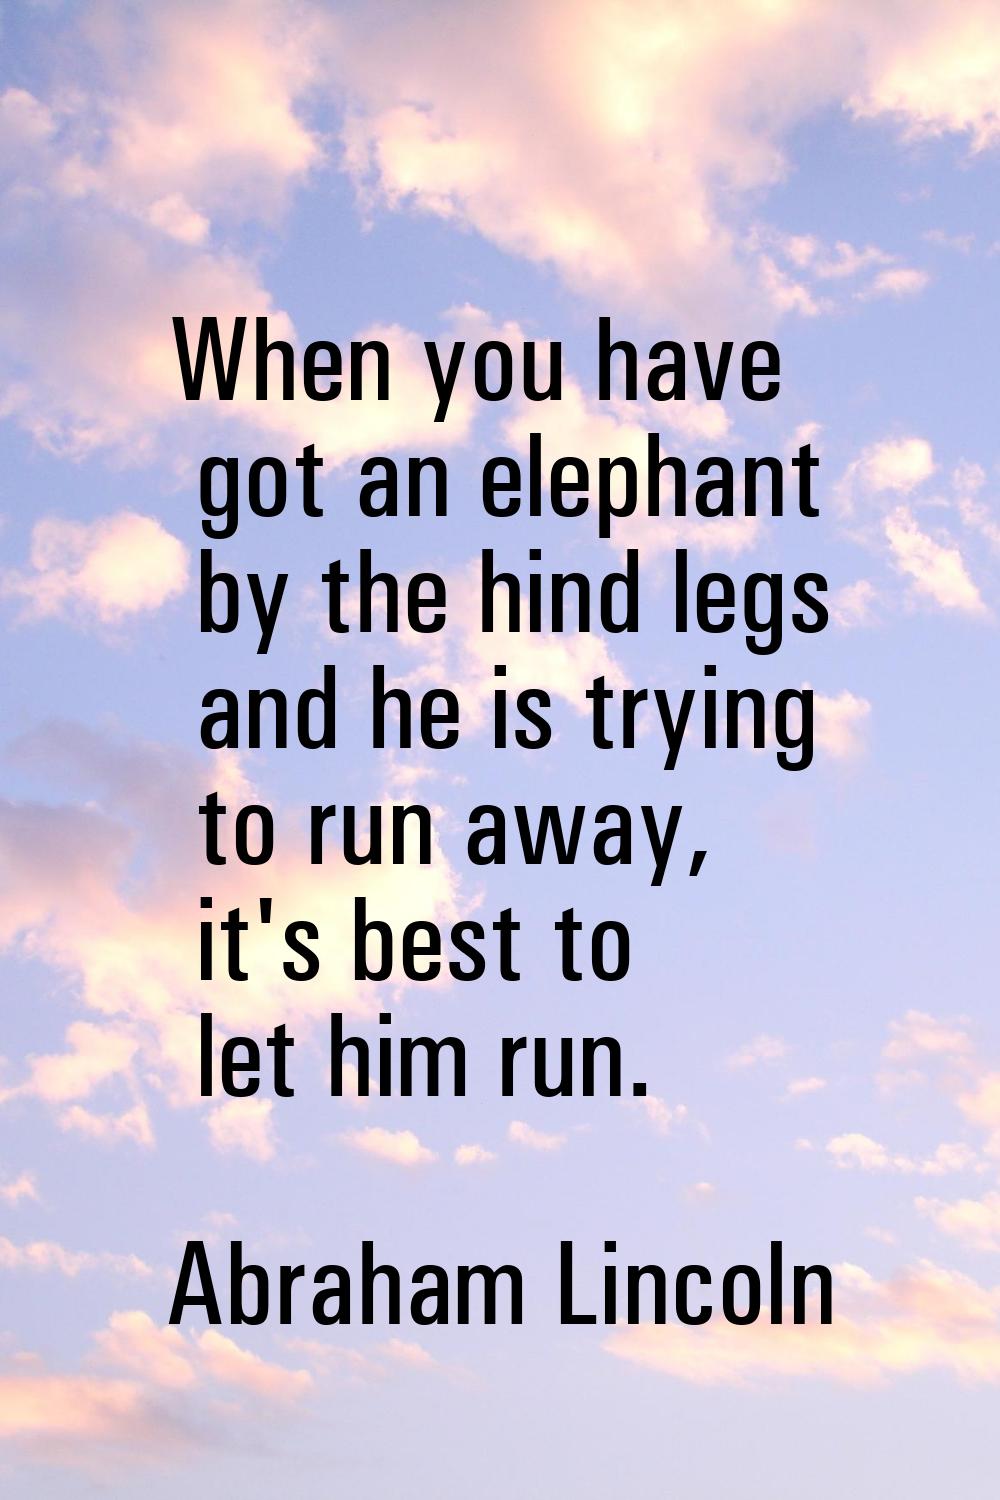 When you have got an elephant by the hind legs and he is trying to run away, it's best to let him r